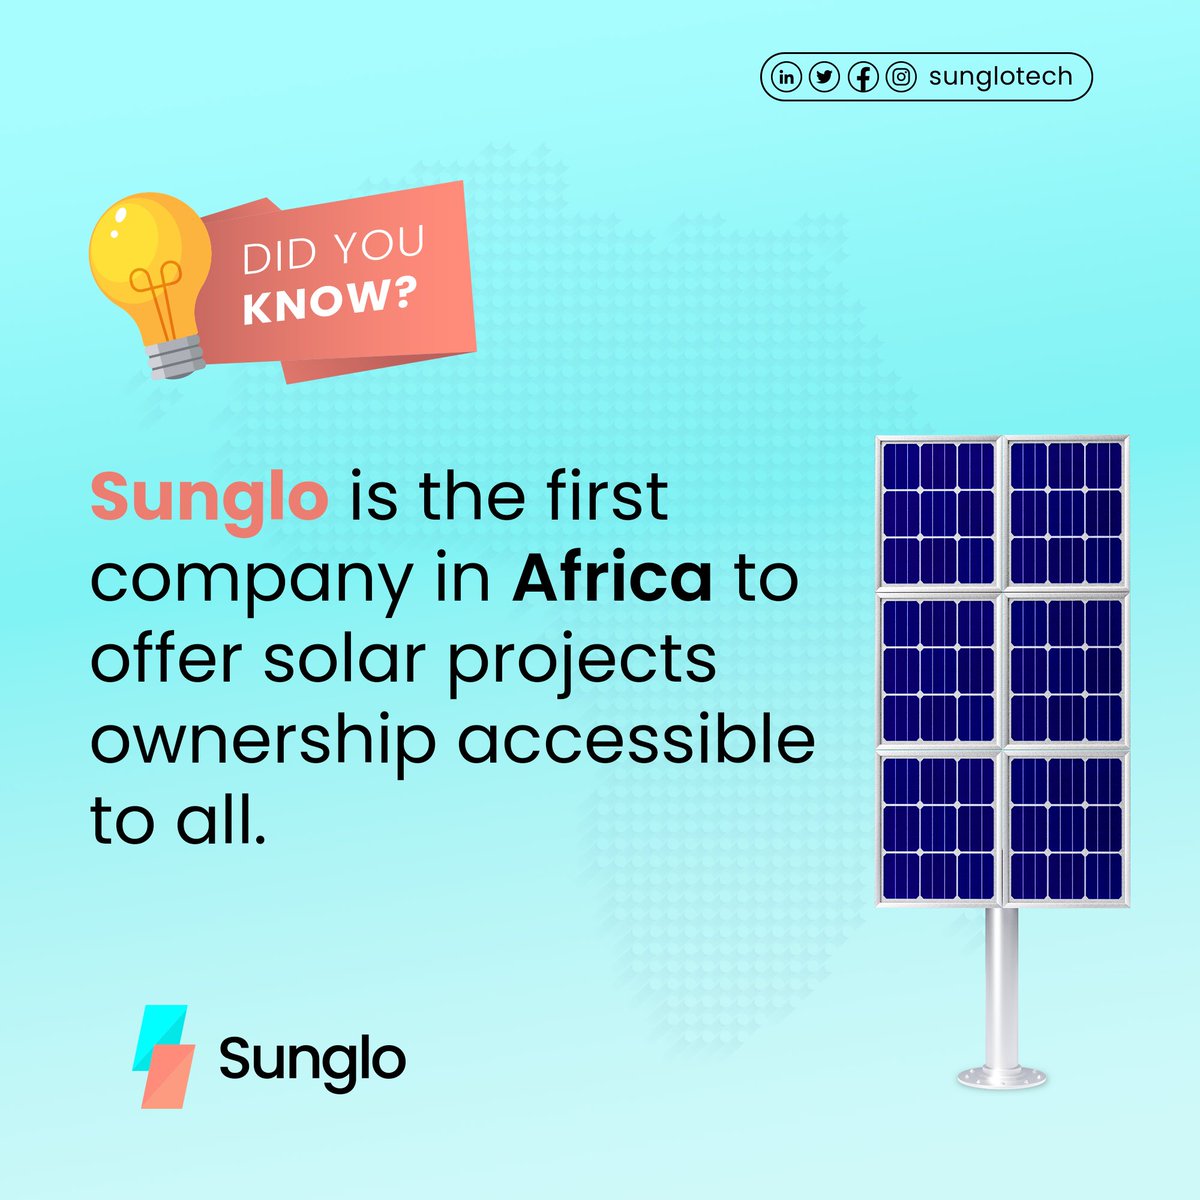 We are committed to providing fractional ownerships of Solar Projects accessible to all.
Be a part of what we are building at Sunglo today by joining our waitlist.
#renewableenergy #cleanenergy #solarsystem #solutionproviders #solarpanels #launch #solarenergy #sunglo
#powerplant